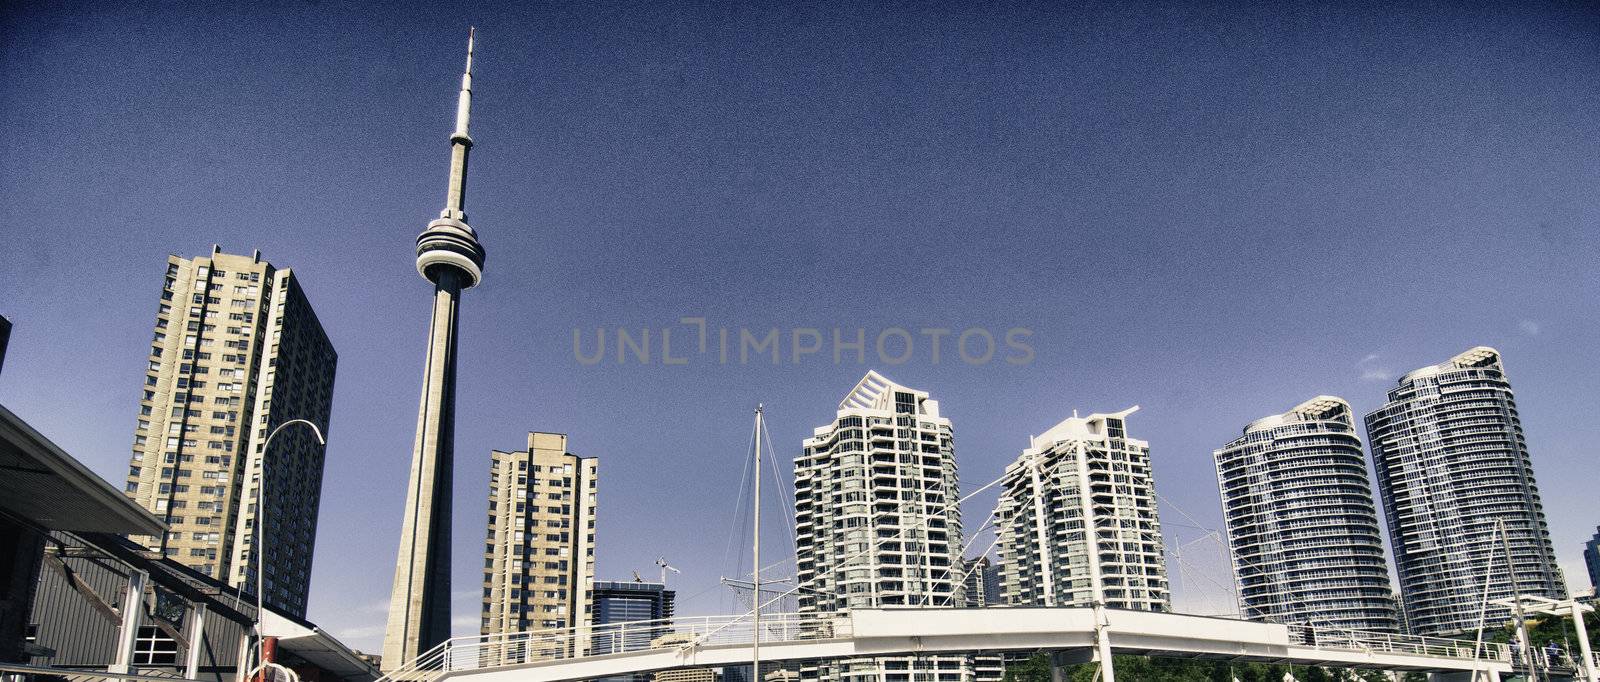 Toronto Architecture and Buildings by jovannig